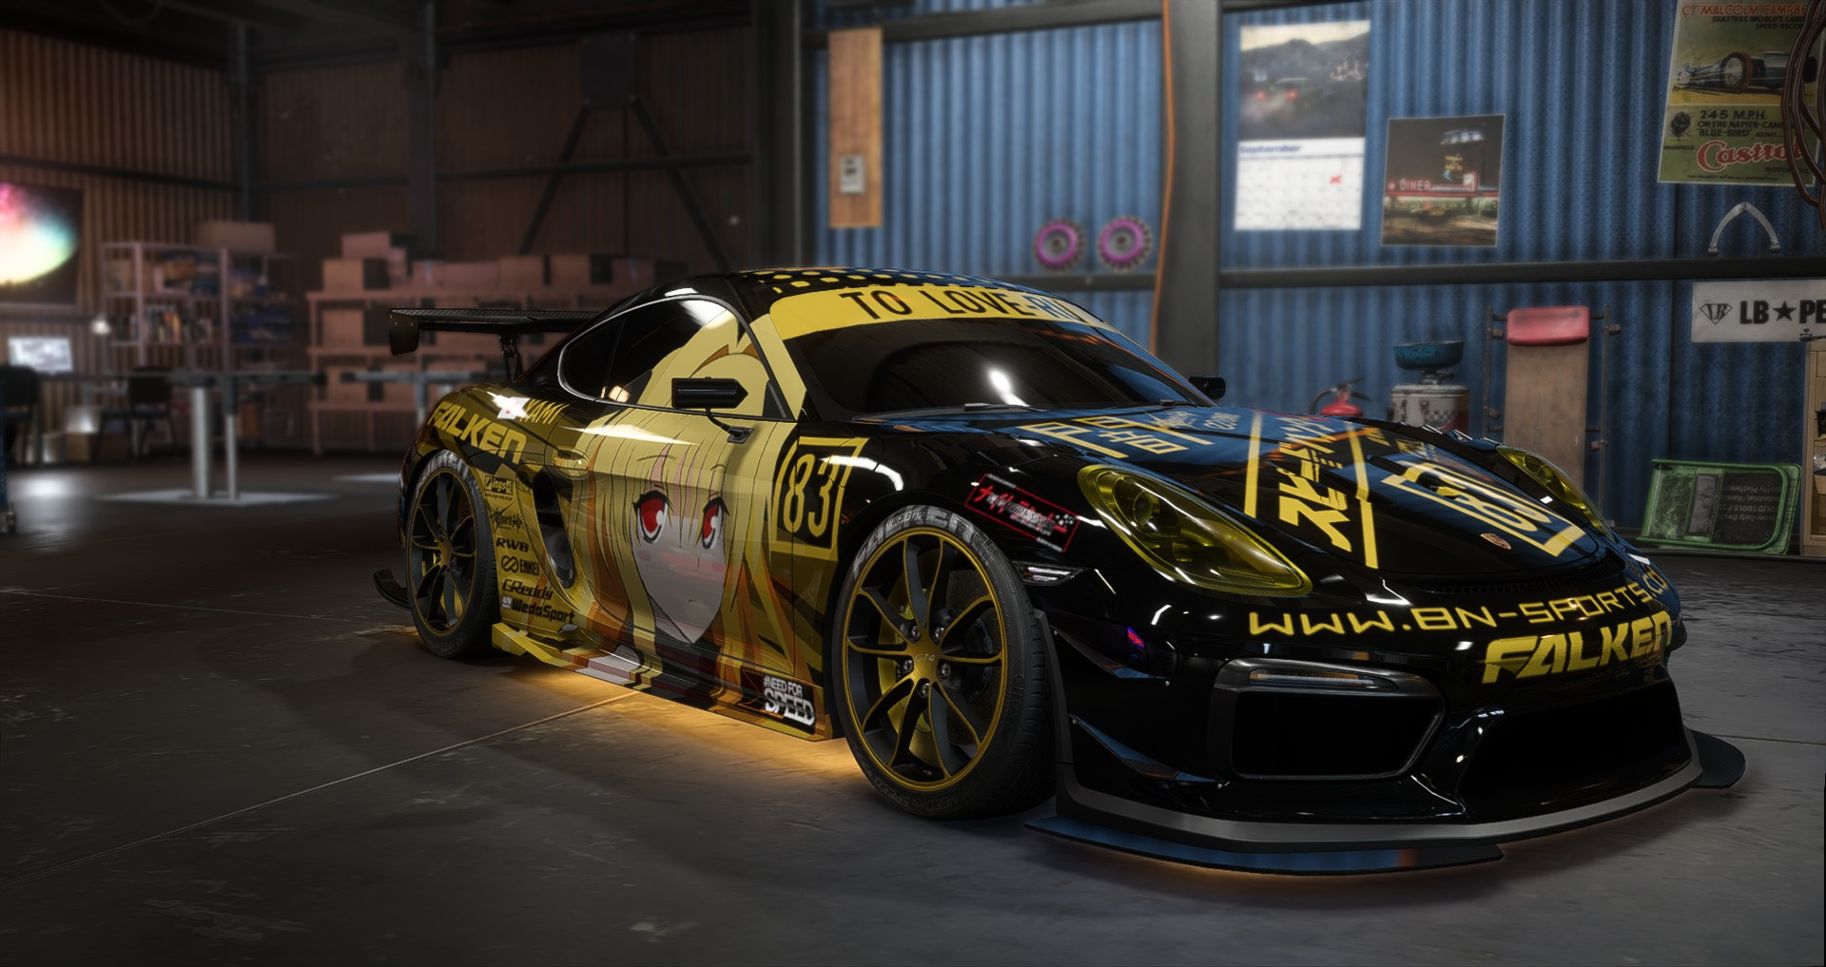 Nfs tuning. Cayman gt4 NFS Payback. Need for Speed Payback Porsche Cayman gt 4. Porsche Cayman gt 4 NFS. NFS Payback Porsche Cayman gt4.